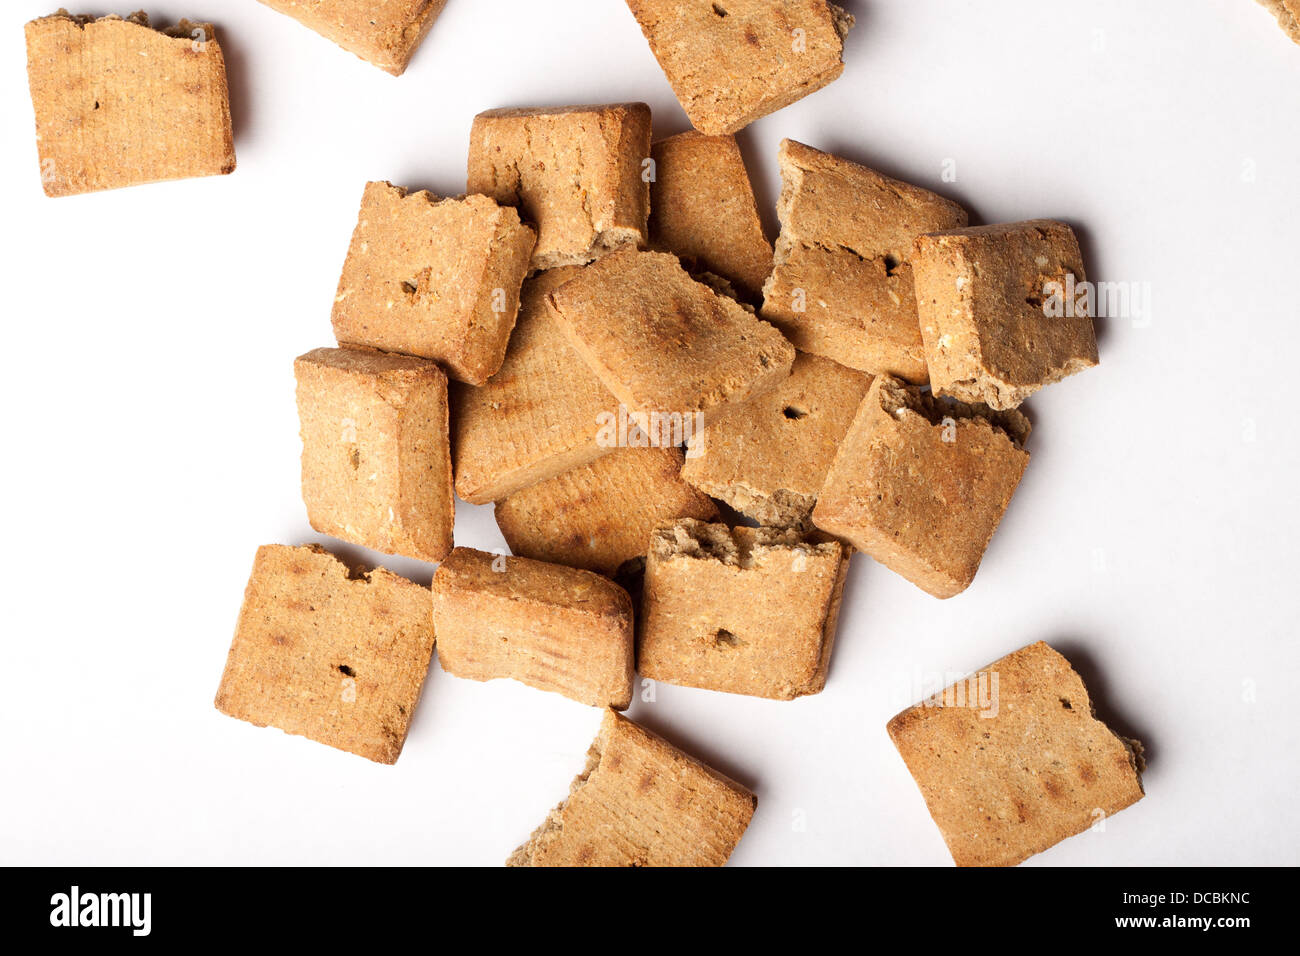 Pile of dog treats against a white background Stock Photo